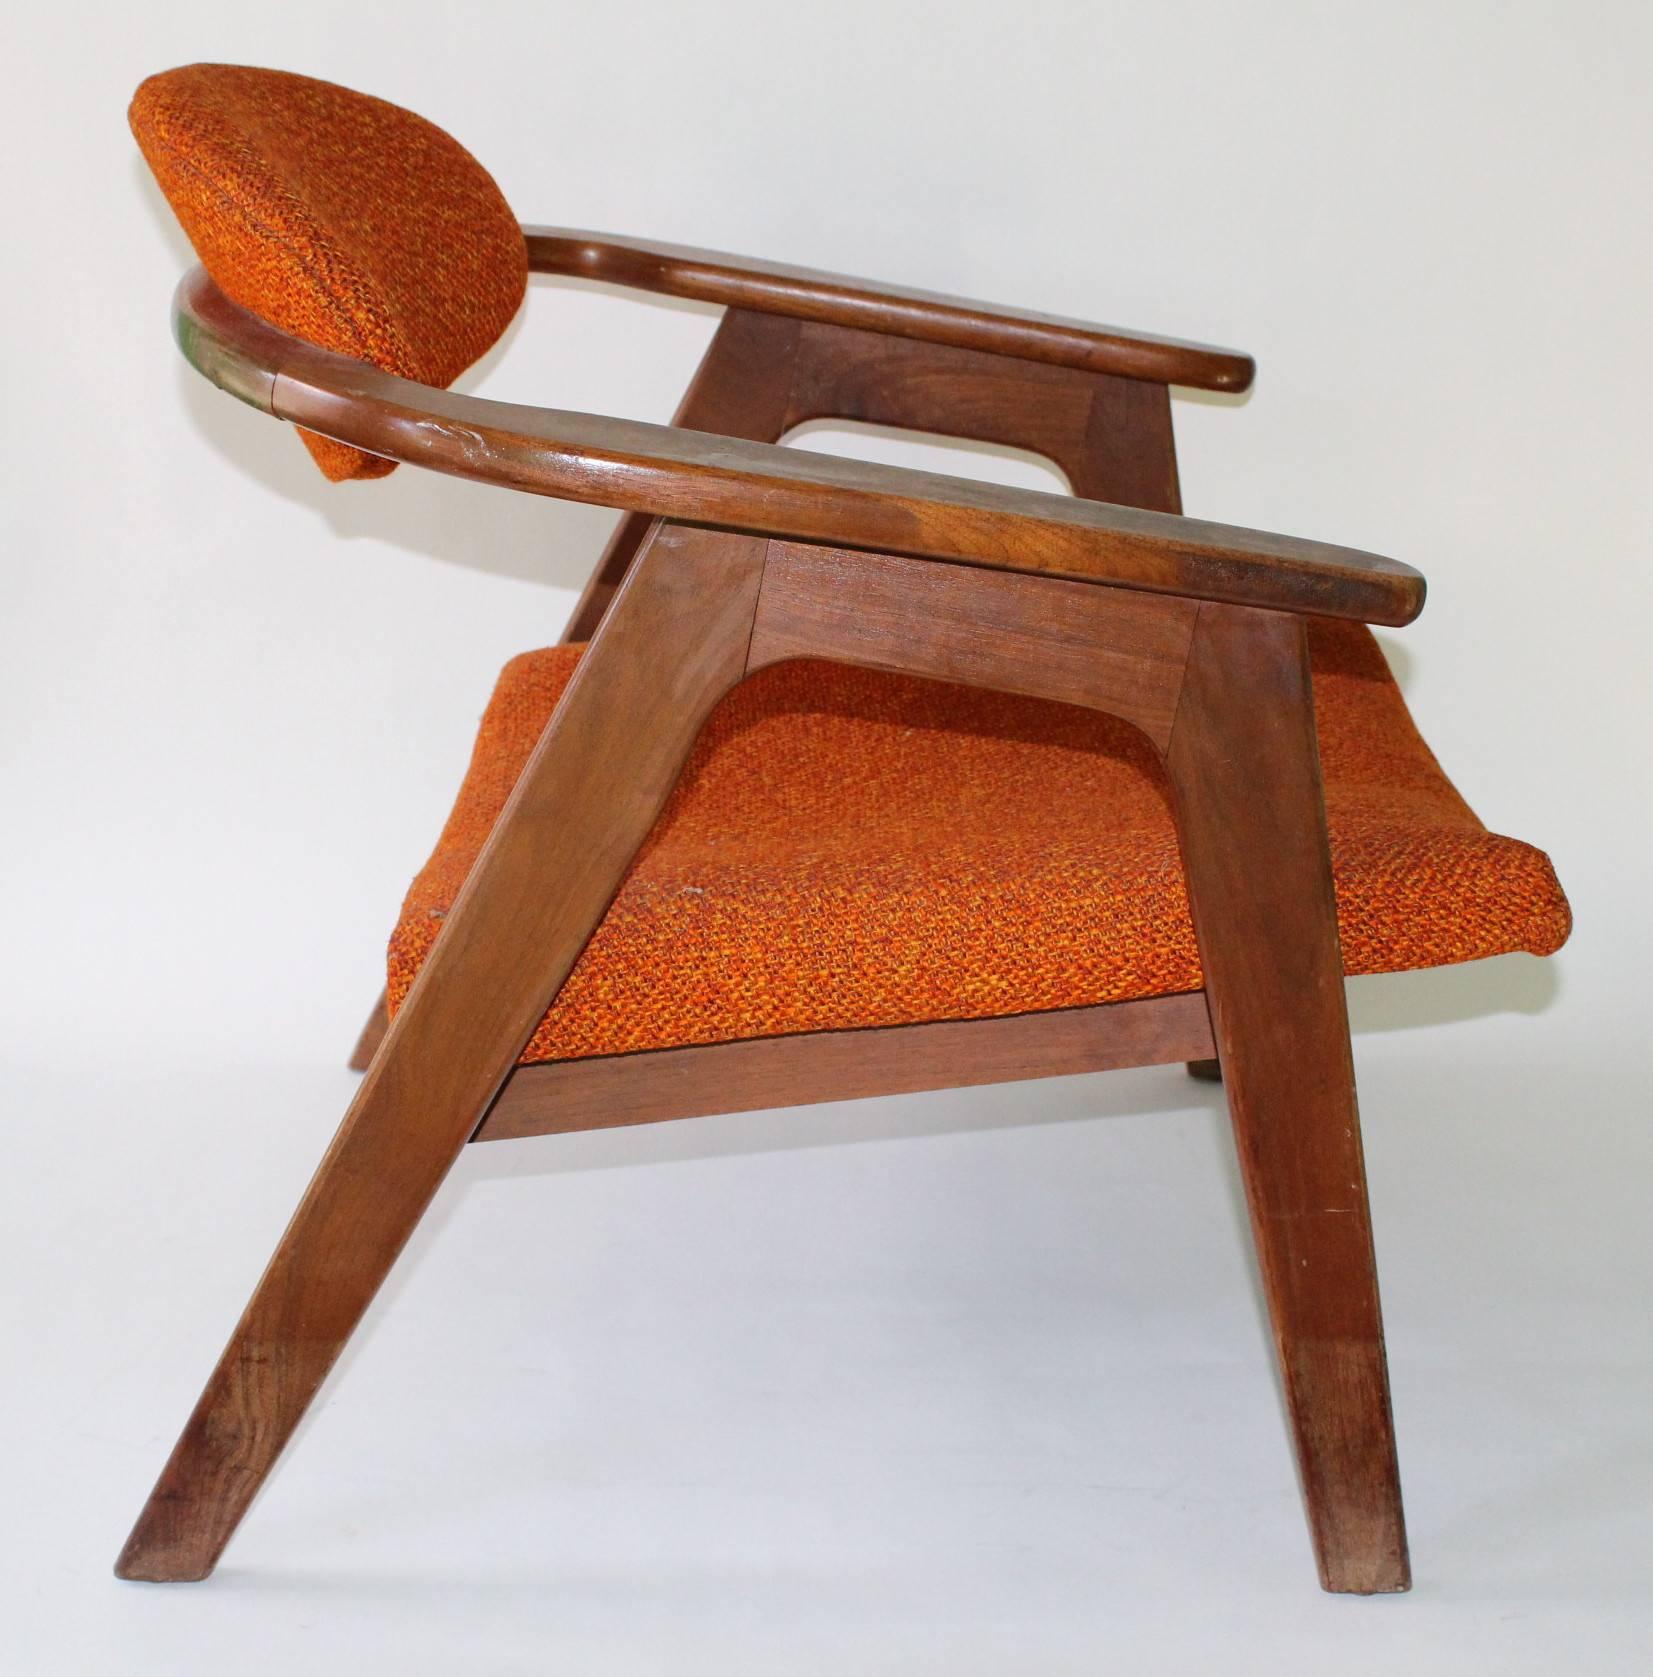 A pair of Mid-Century Modern 'Captain's Chairs' by designer Adrian Pearsall, manufactured circa 1950s, seats and backs with original orange upholstery, against wood frames with round backs, raised on slanted legs. Good vintage condition, consistent